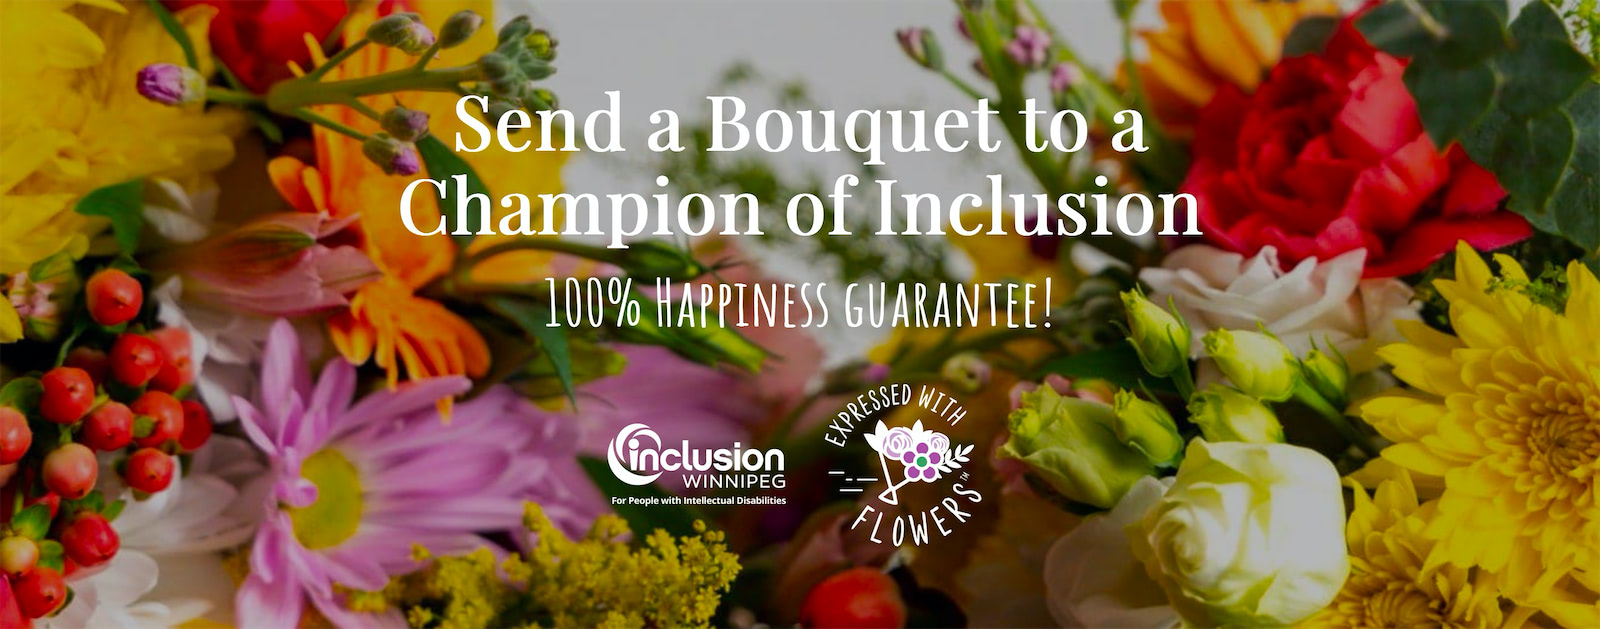 Send a Bouquet to a Champion of Inclusion